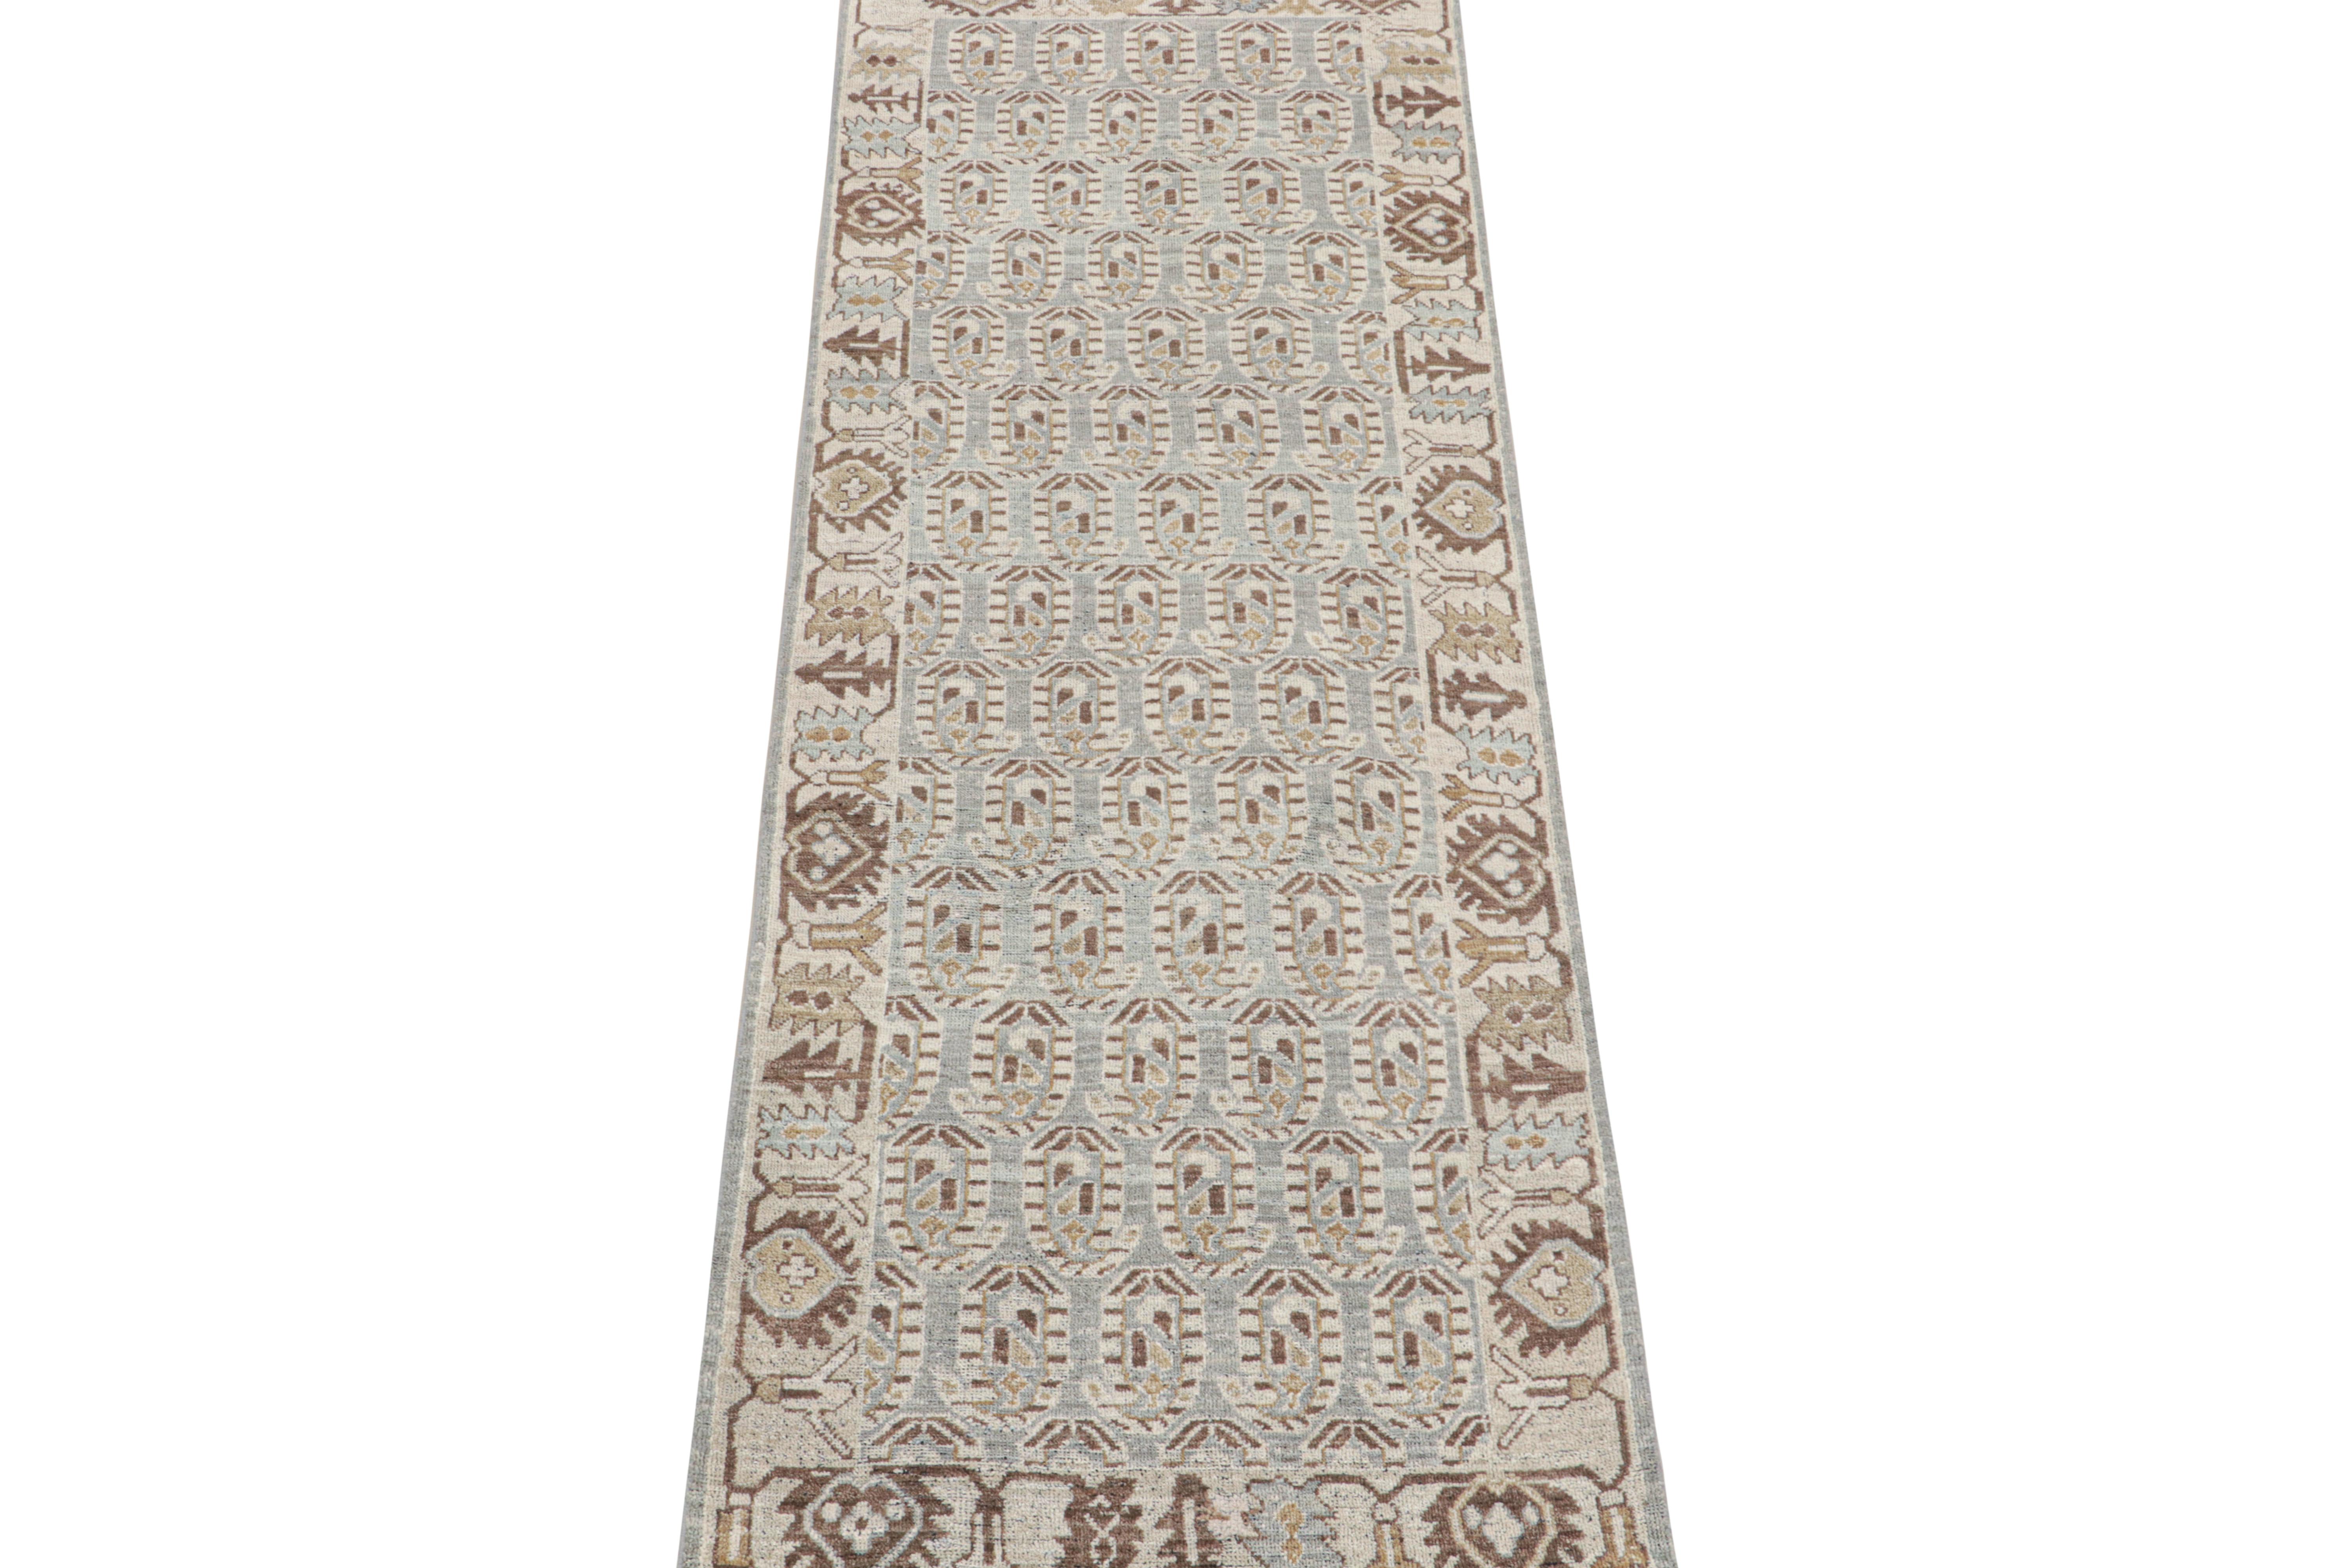 This custom runner design is a new entry to Rug & Kilim’s custom classics Burano Collection.

These photos represent a 3x10 runner in this design—inspired by midcentury Persian rugs with geometric paisley patterns. Its colorway plays cool and rich